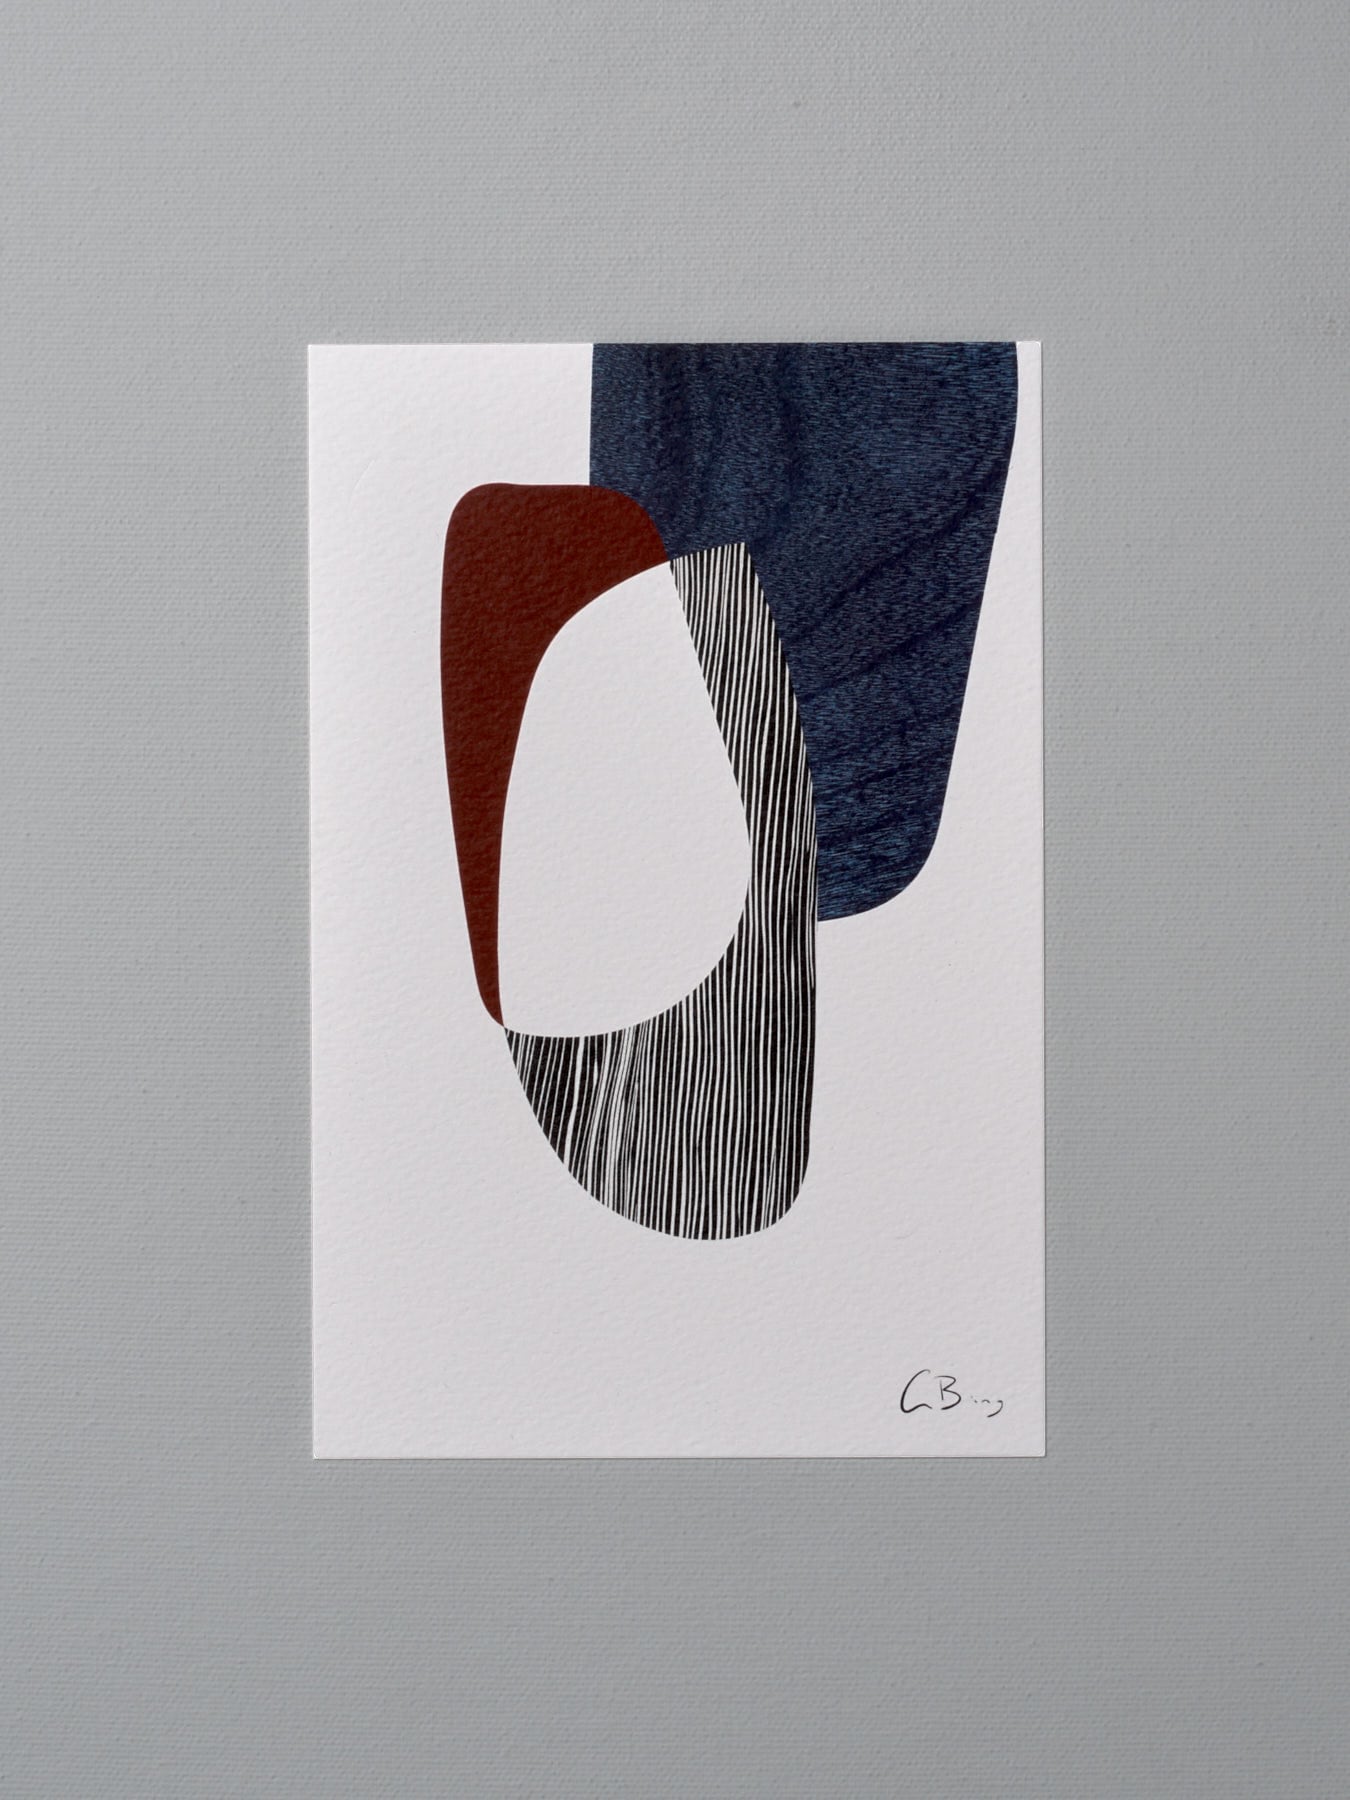 A Postcard Print - Rna with a blue, red, and brown design designed by Gidon Bing.